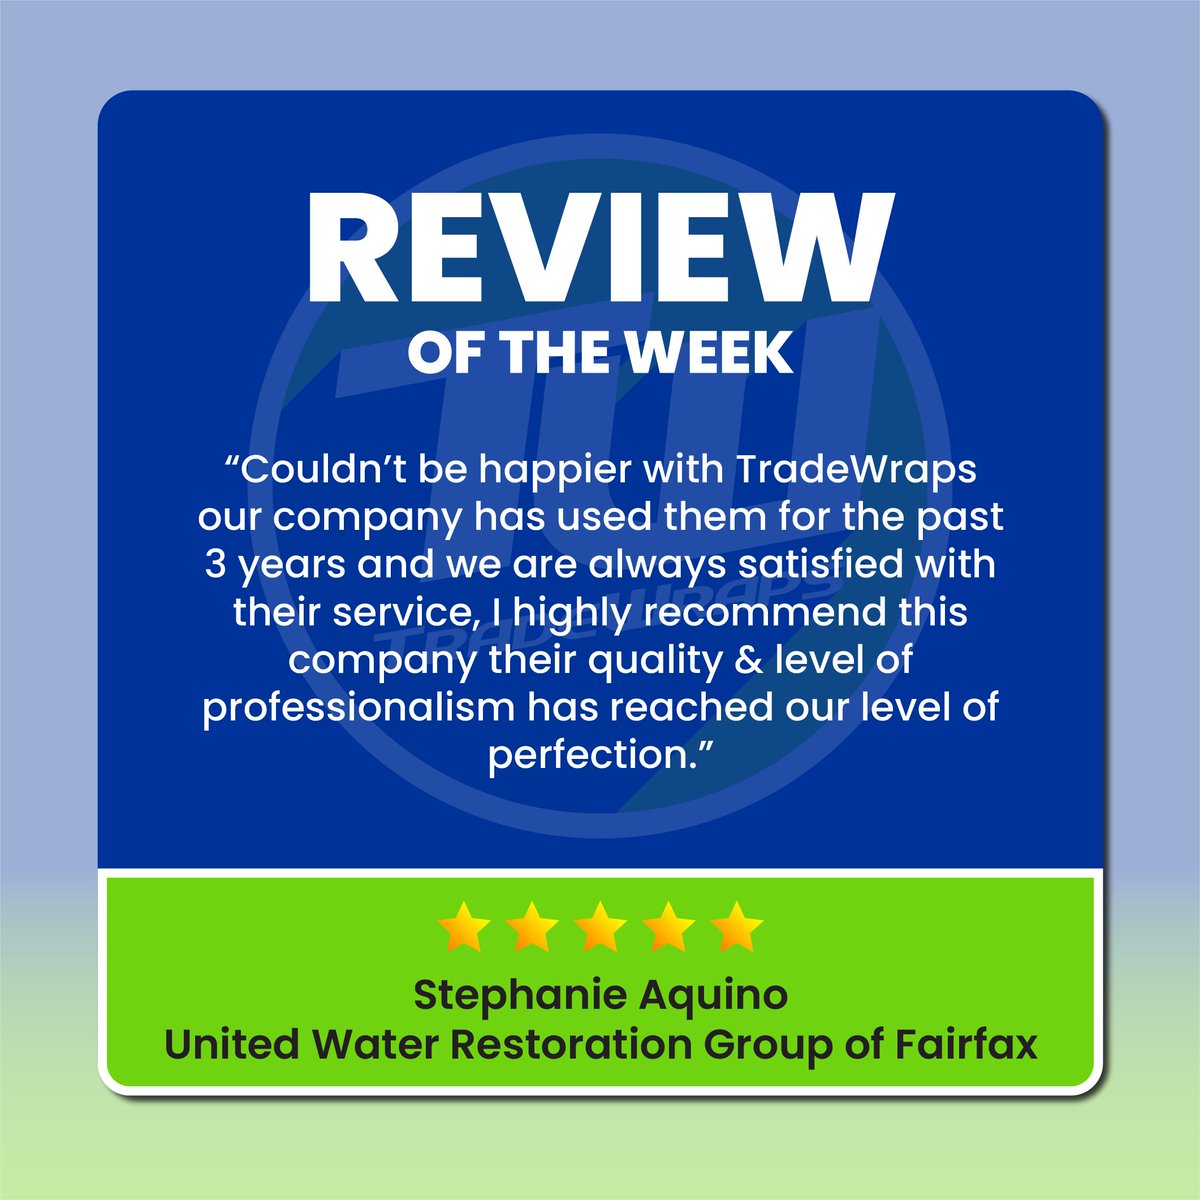 For this week's review, we have United Water Restoration Group of Fairfax !
#vehiclewraps #ReviewOfTheWeek #tradewraps #itsnotpaint #restoration